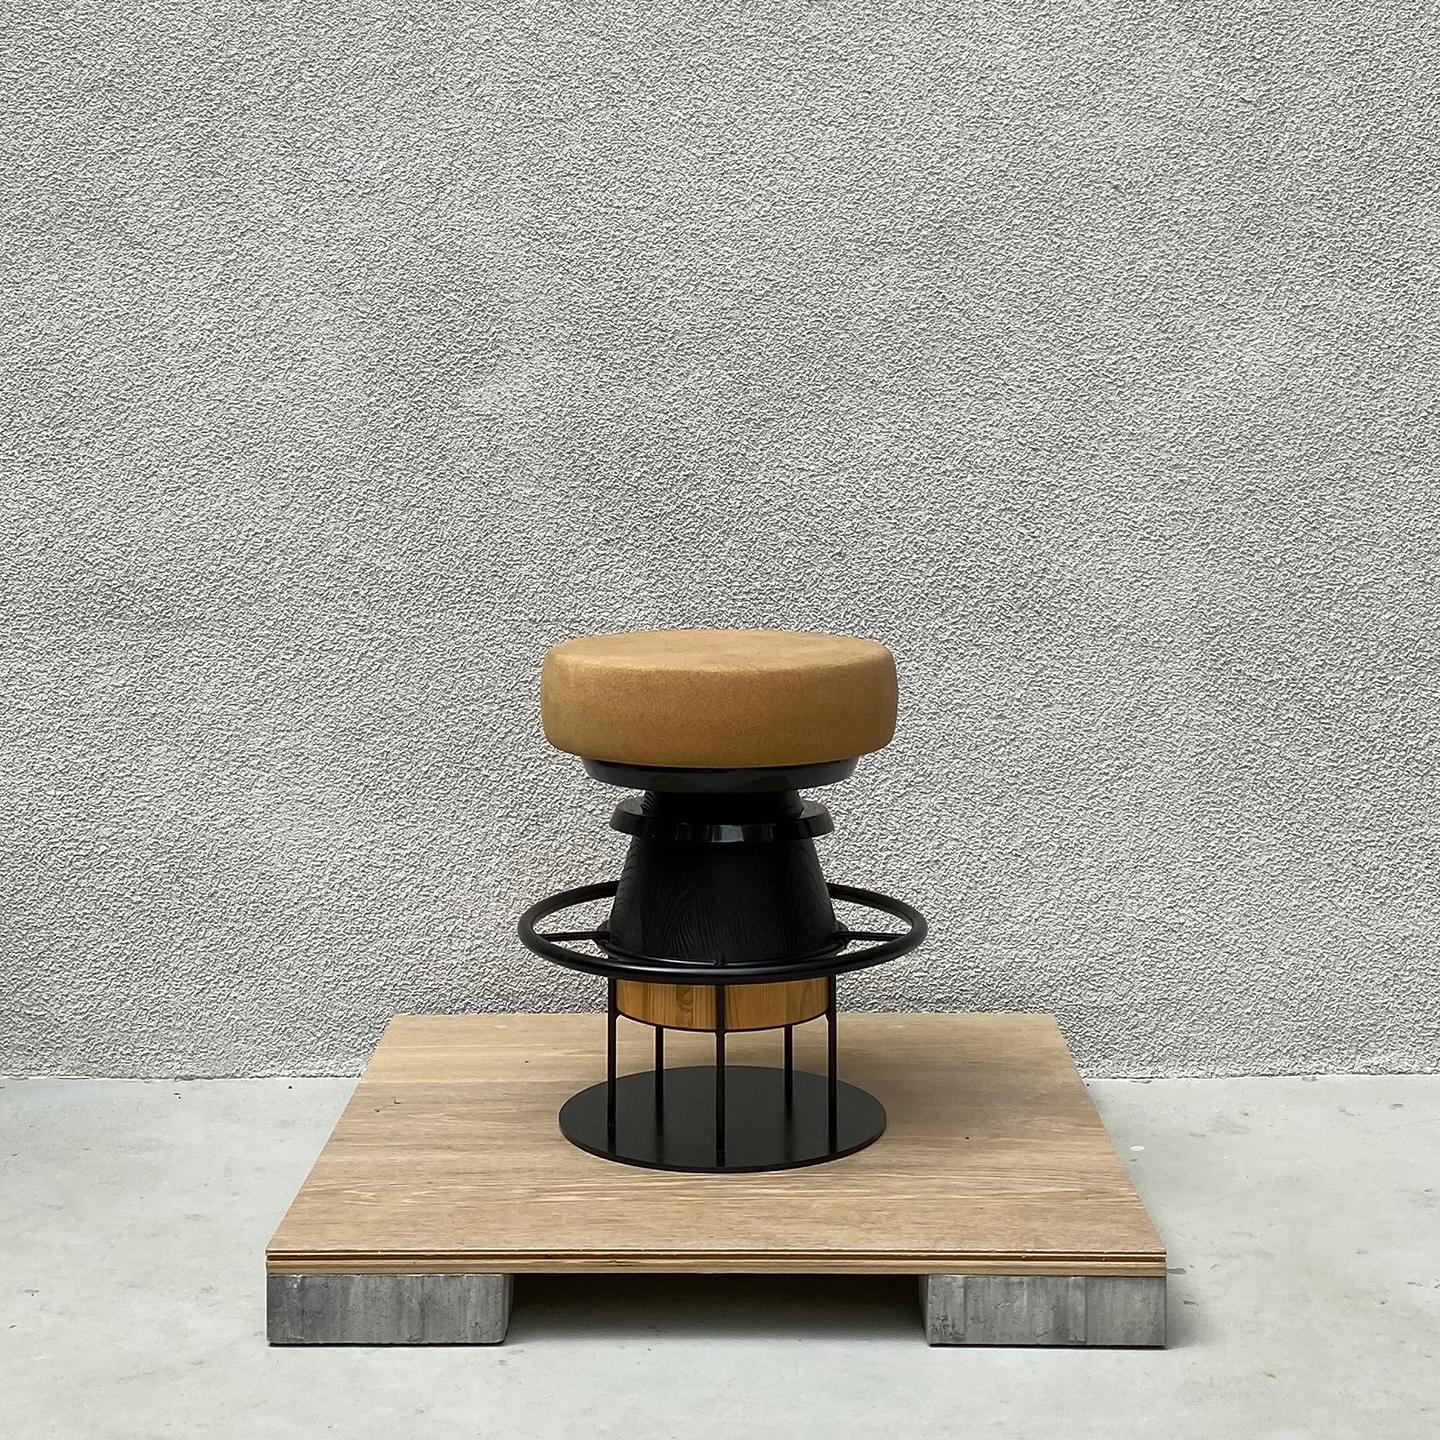 Tembo is a sculptural stool that combines a wood metal body with a solid cork seat. The designers drew their inspiration both from the African tam-tams -Tembo means elephant coot in swahili- and give a nod to the Memphis Group of the 80s aesthetics.